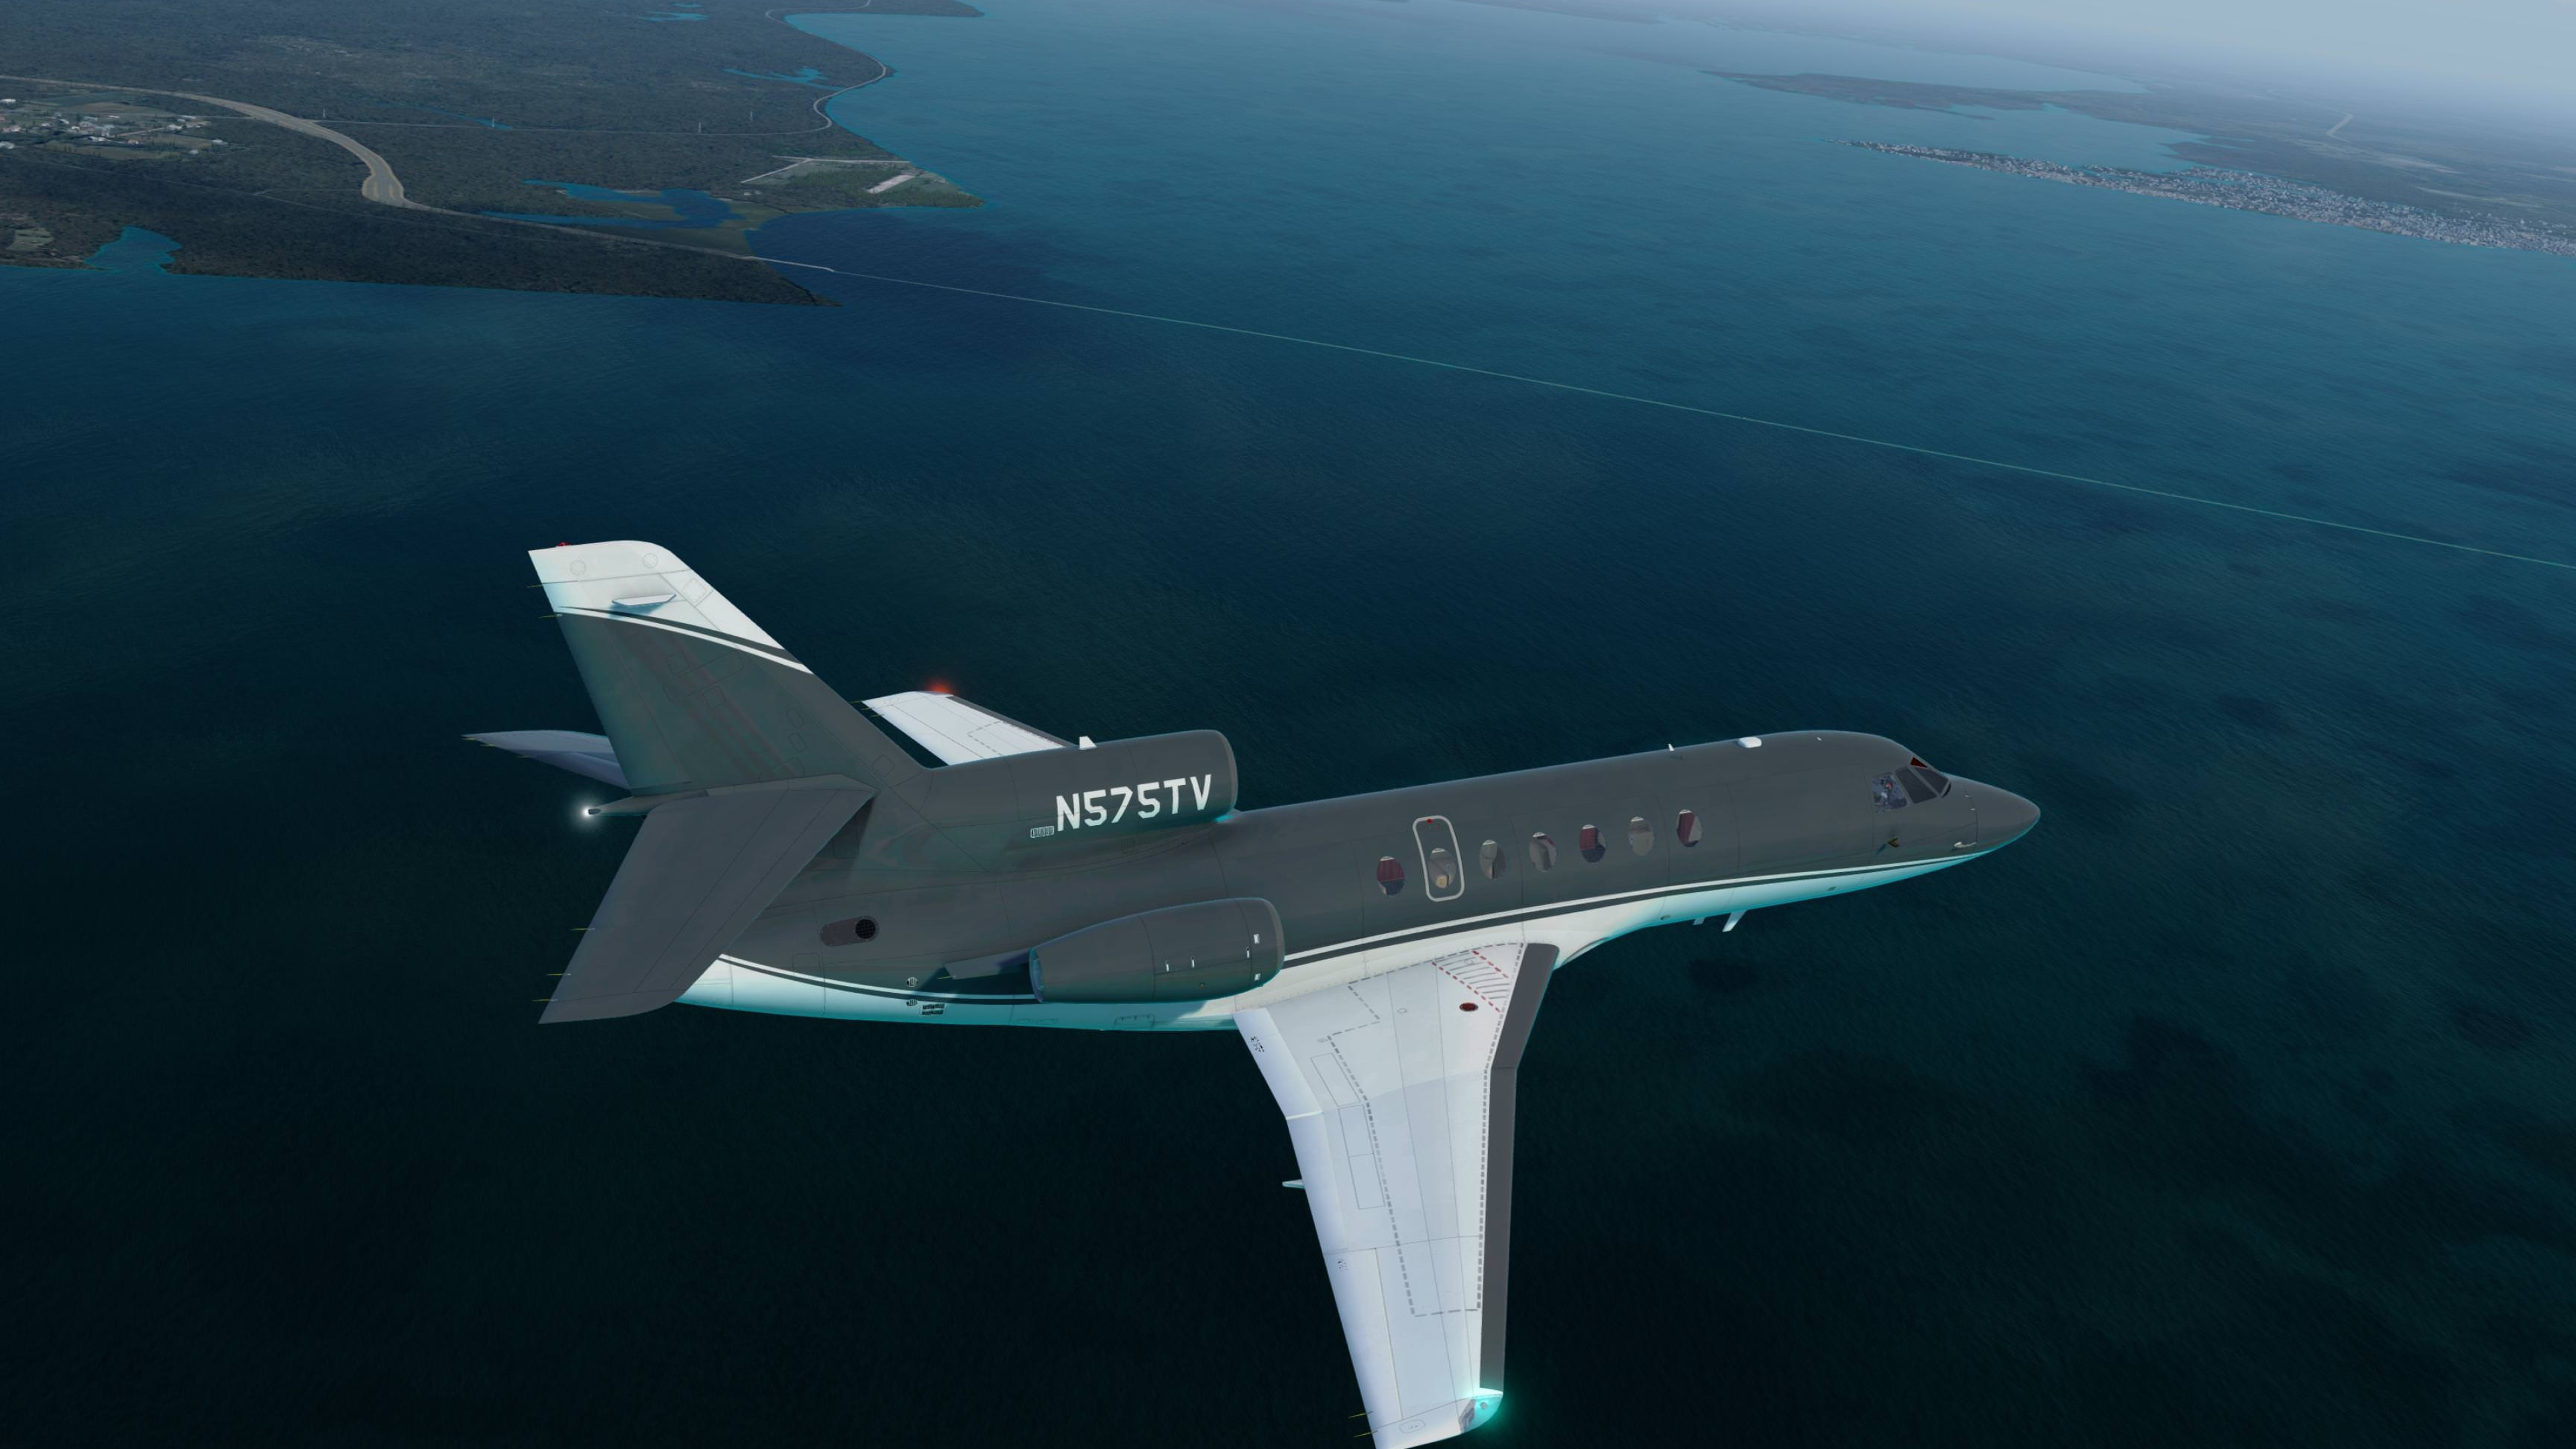 Flysimware Falcon 50 is out - Get'm while they're hot. - Page 2 - Dassault Falcon 50 - The AVSIM Community 3840x2160